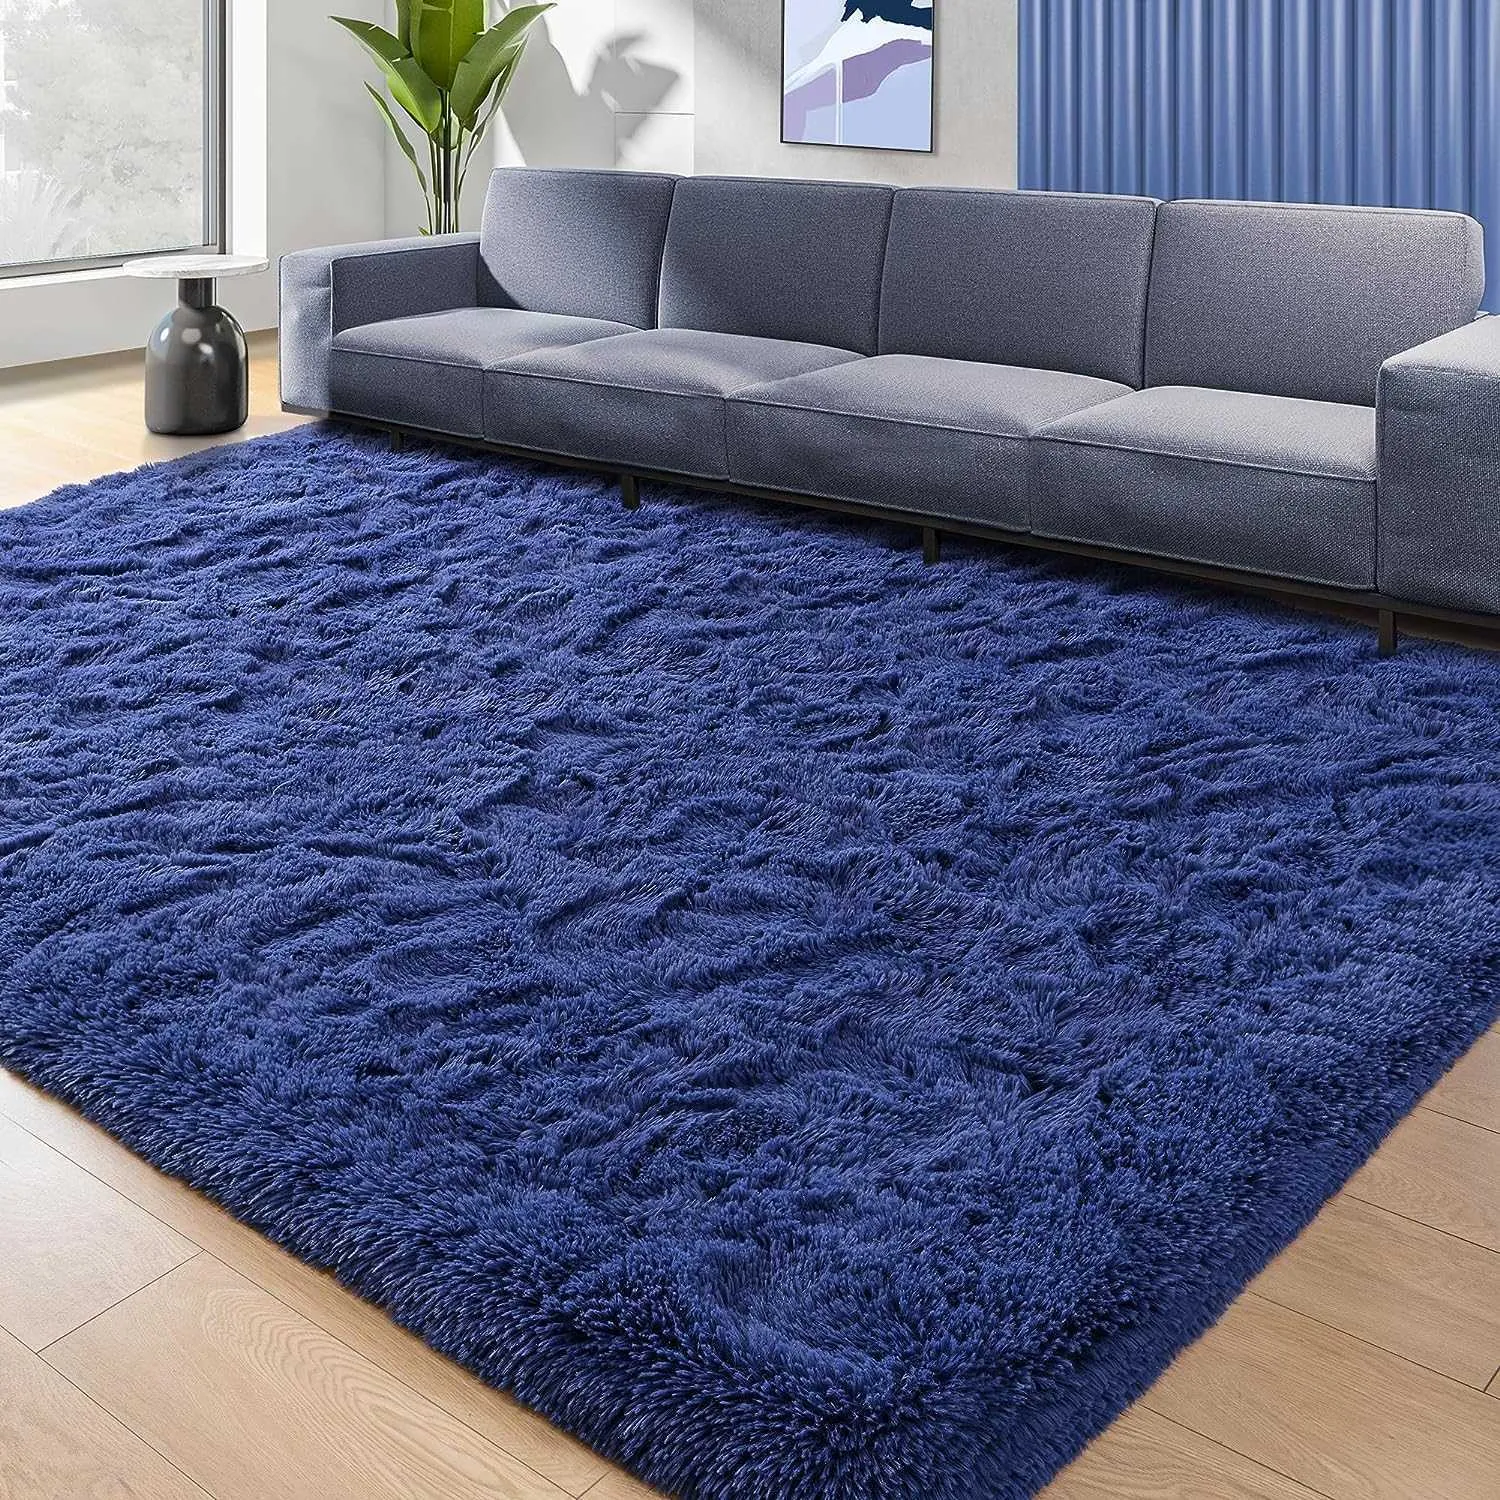 Carpet large soft interior neutral modern abstract washable bedroom Dining Farm Fun Home Office - more suitable for car pets and cars P230907714